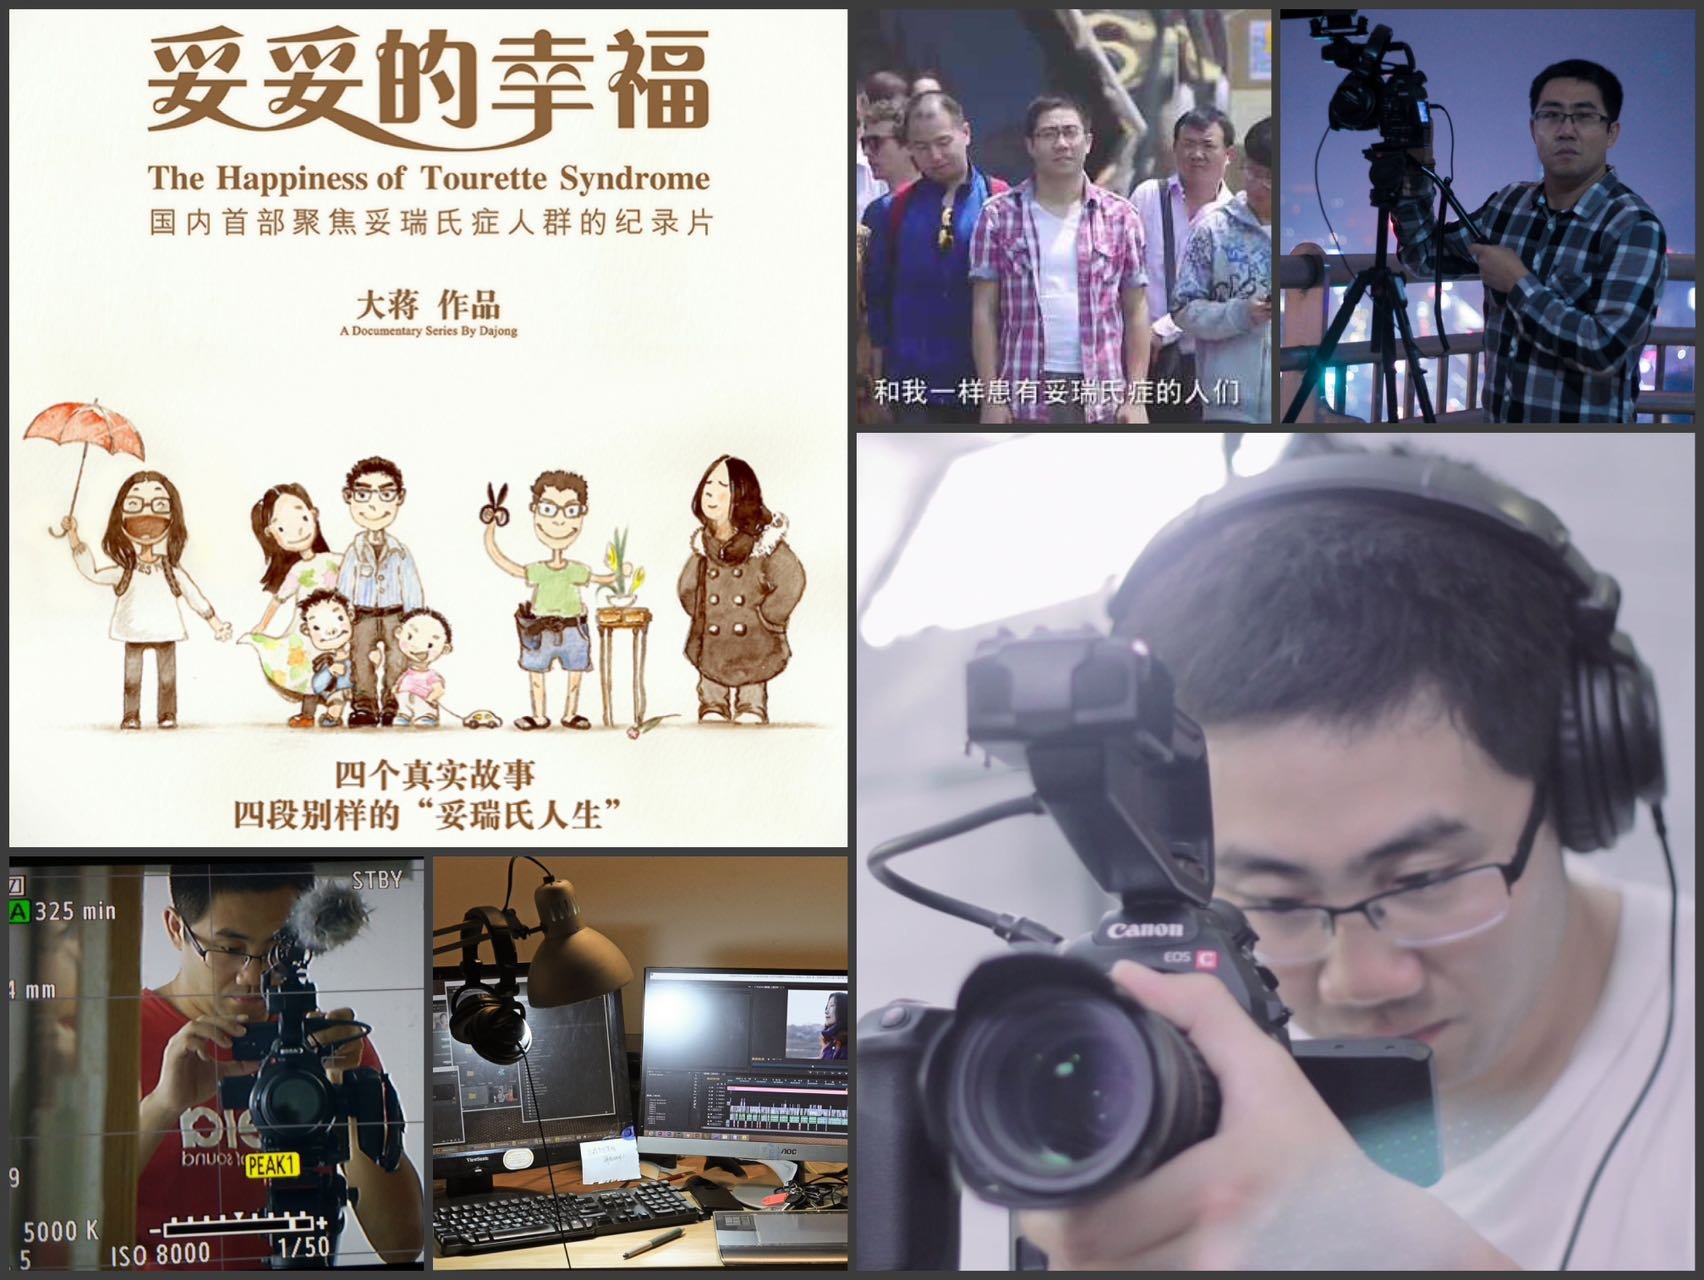 Dajiang: His documentary is called 'The Happiness of Tourette Syndrome: 妥妥的幸福 [Tuǒtuǒ de Xìngfú]'.